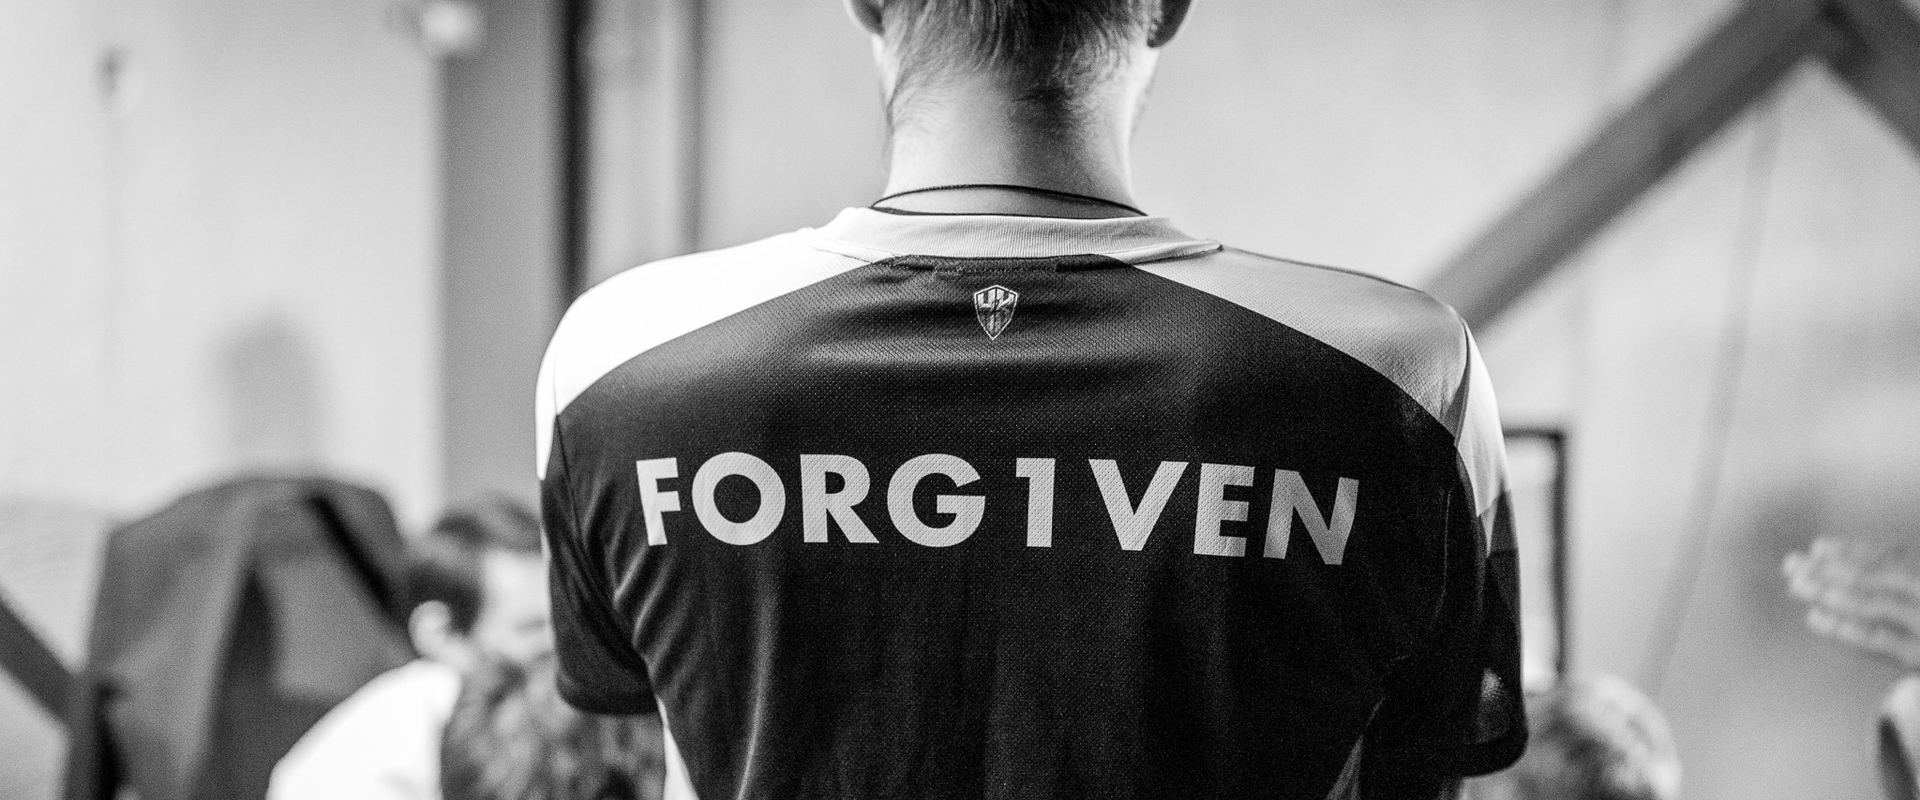 FORG1VEN: 